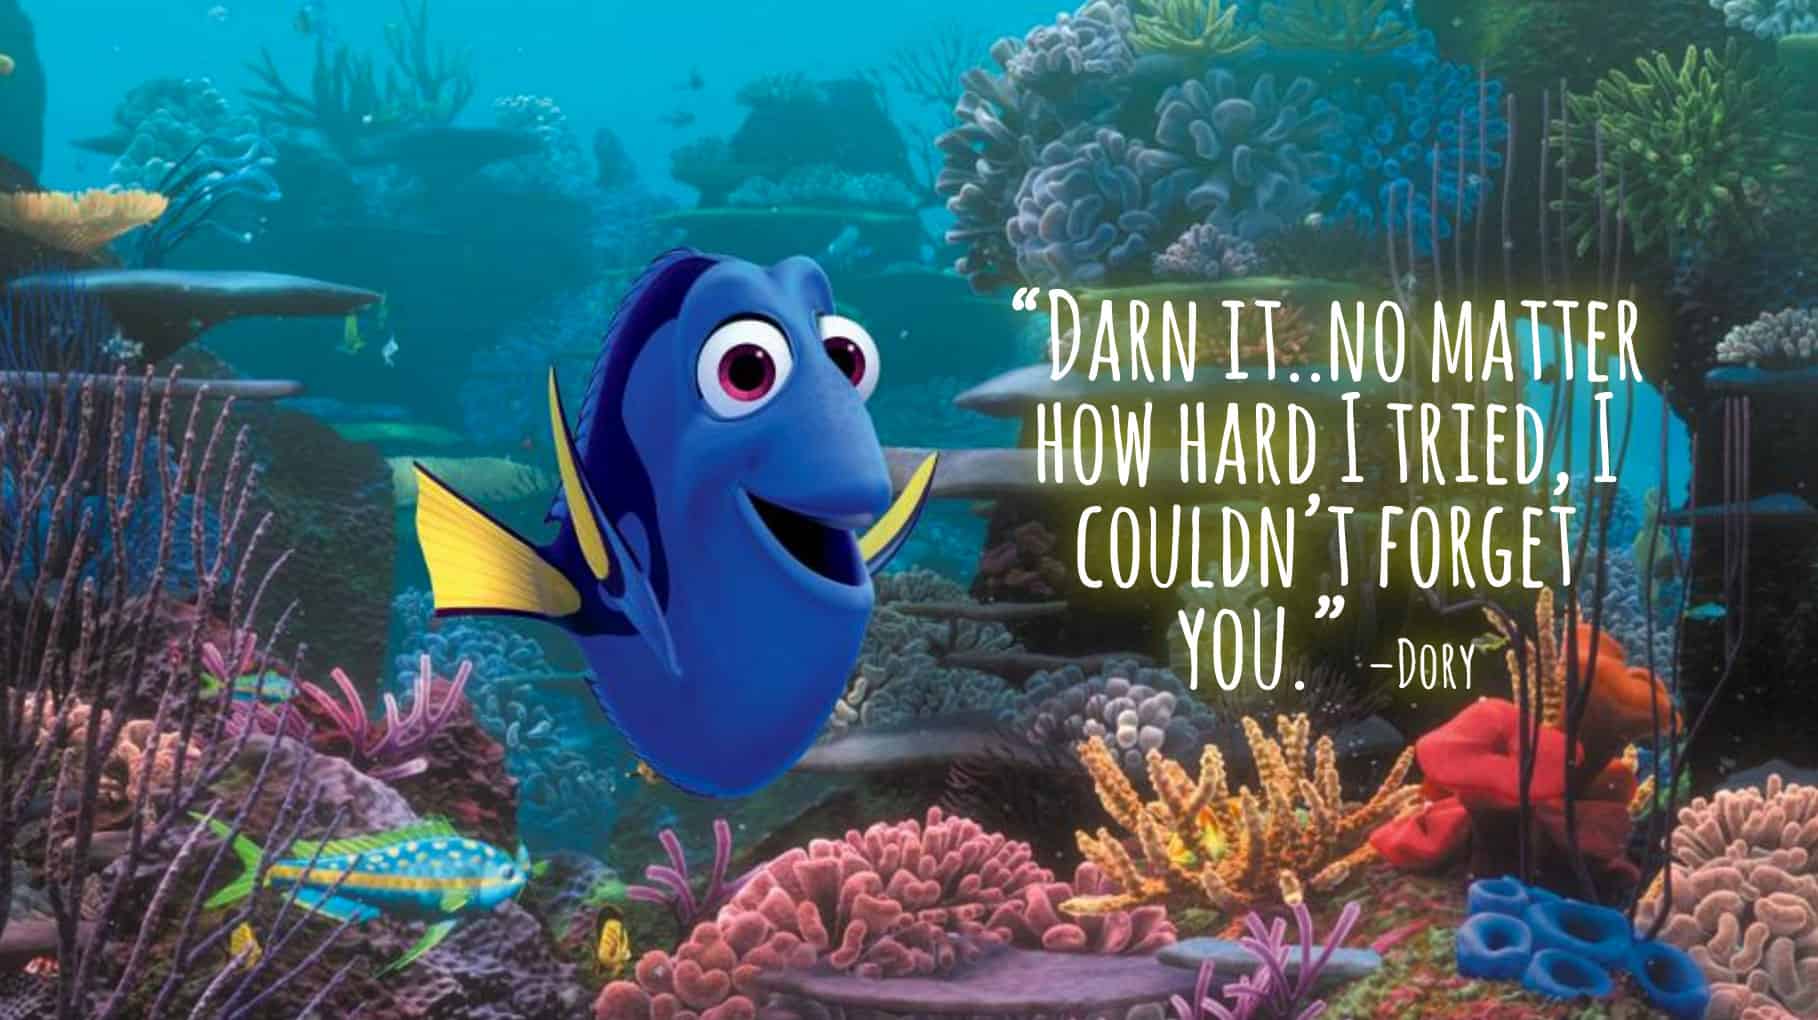 Finding Dory Quotes - Entire LIST of the BEST movie lines in the movie! "Darn it. No matter how hard I tried, I couldn't forget you."